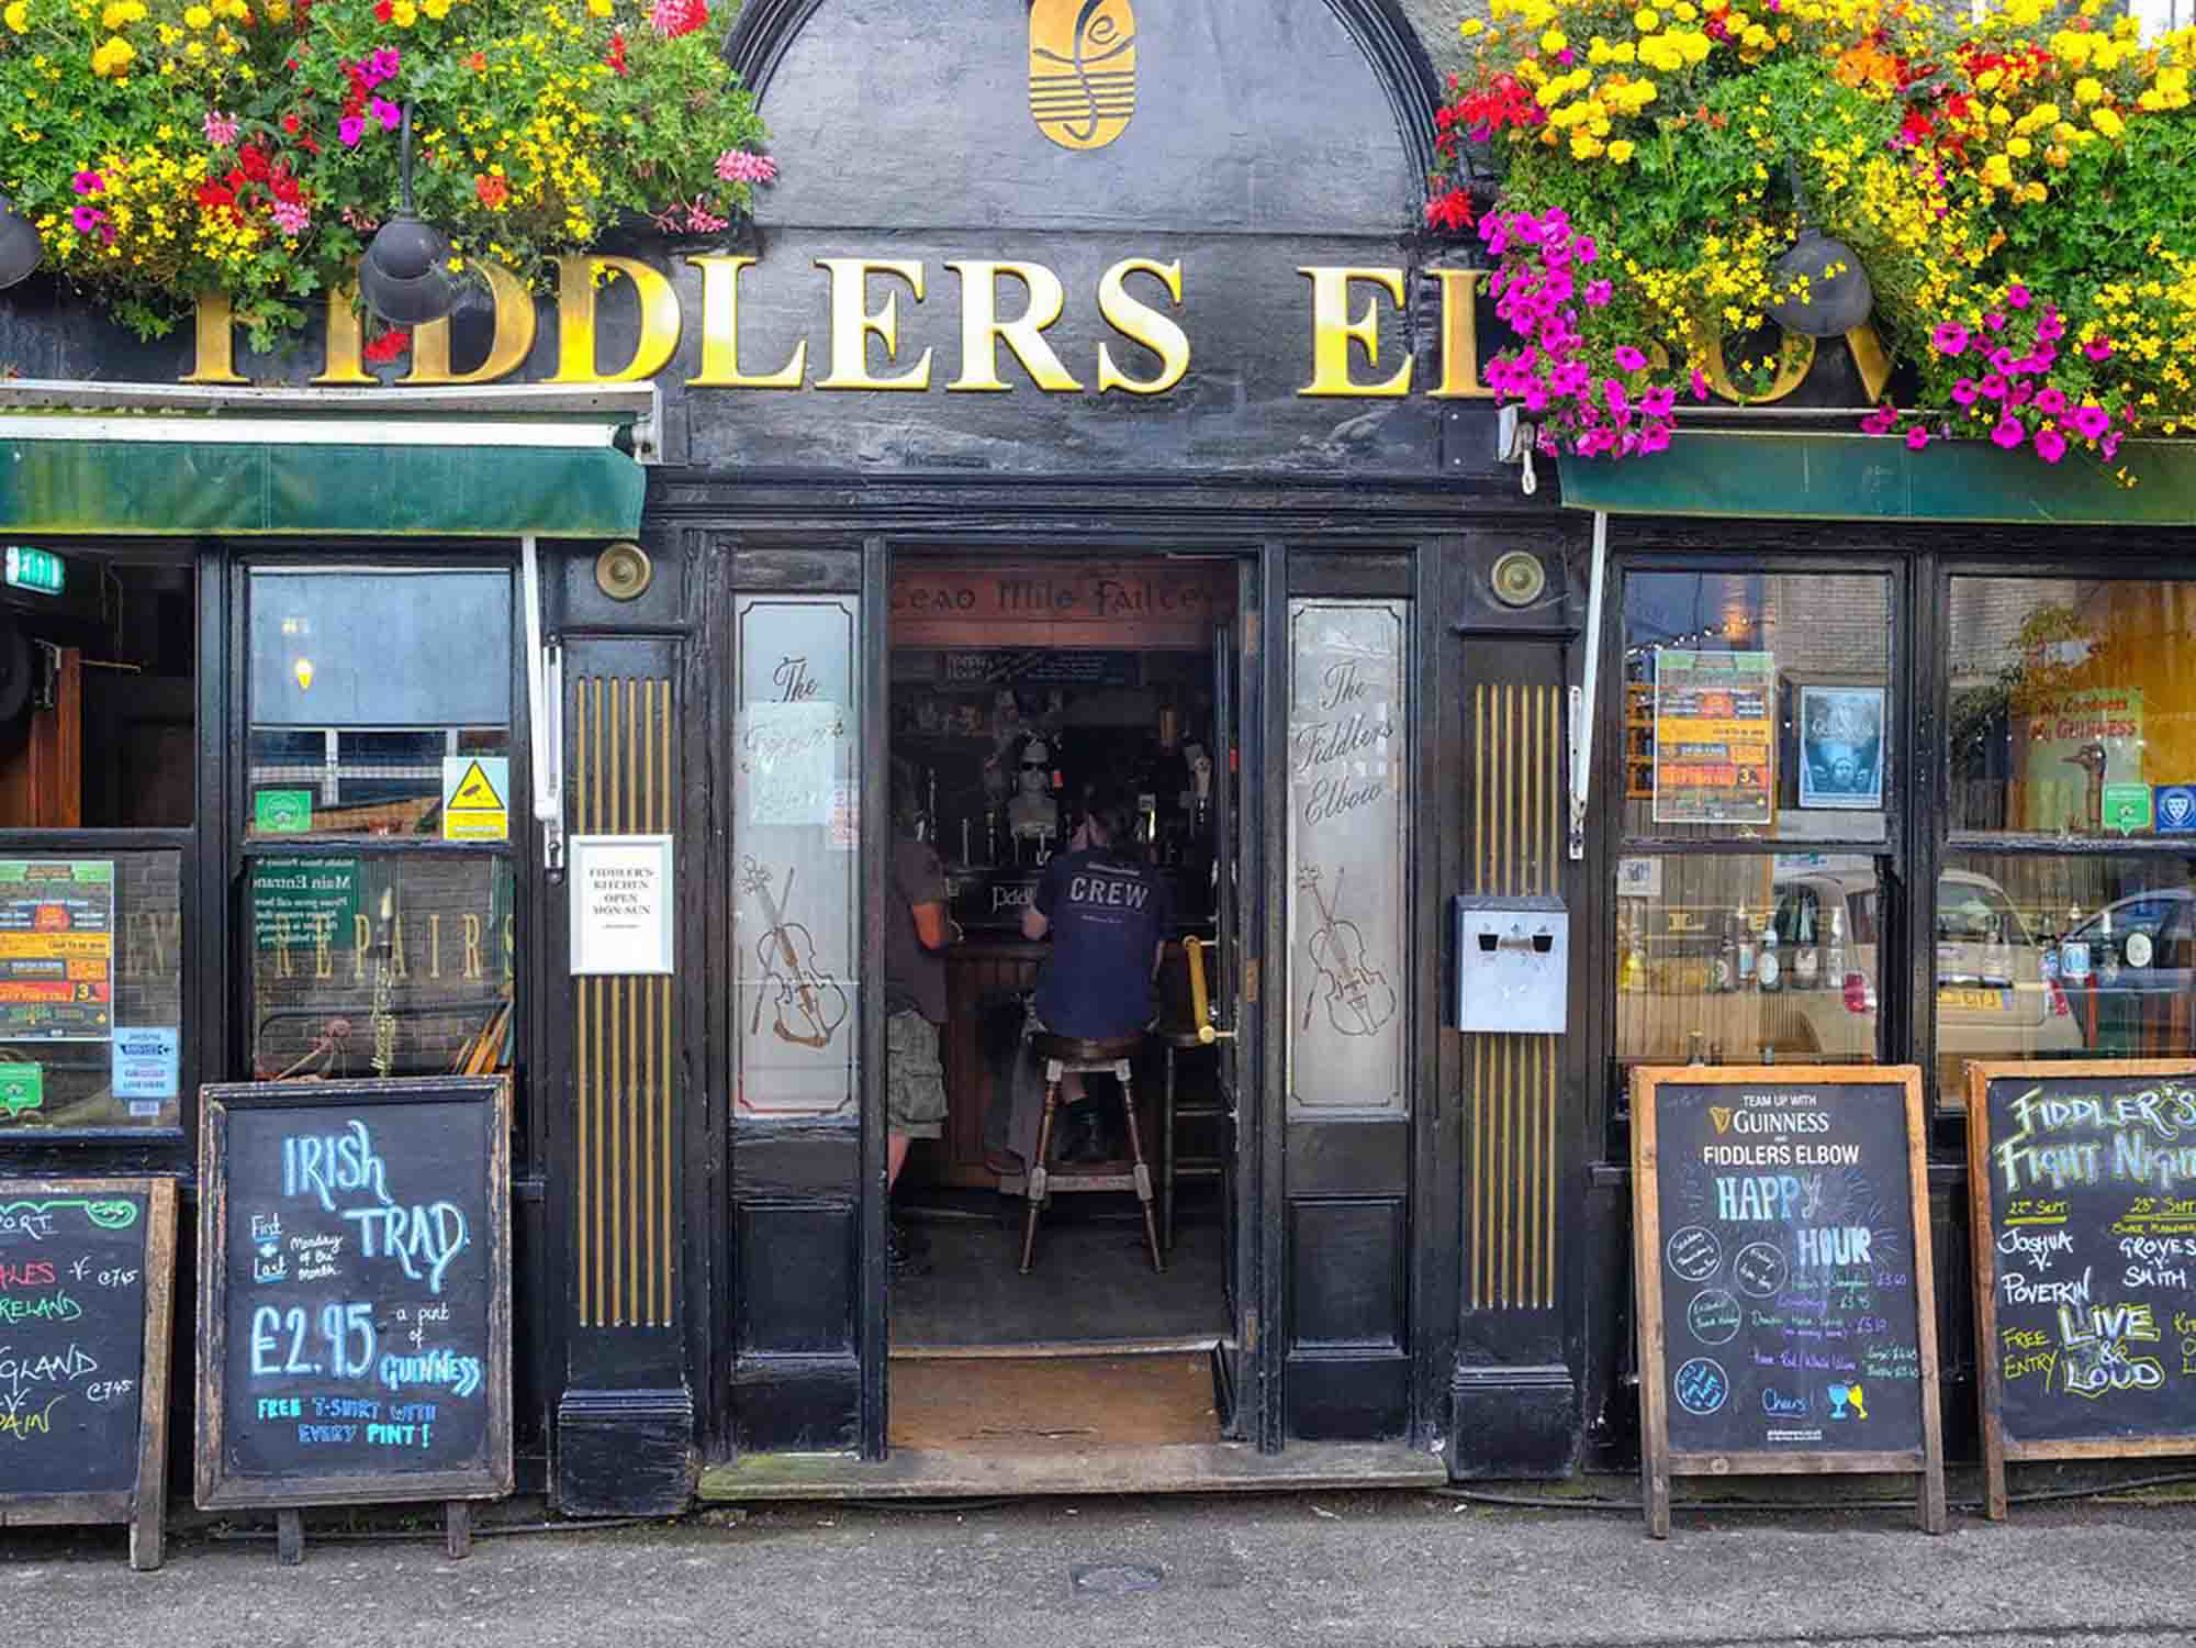 Best Pubs in Brighton - The Fiddlers Elbow